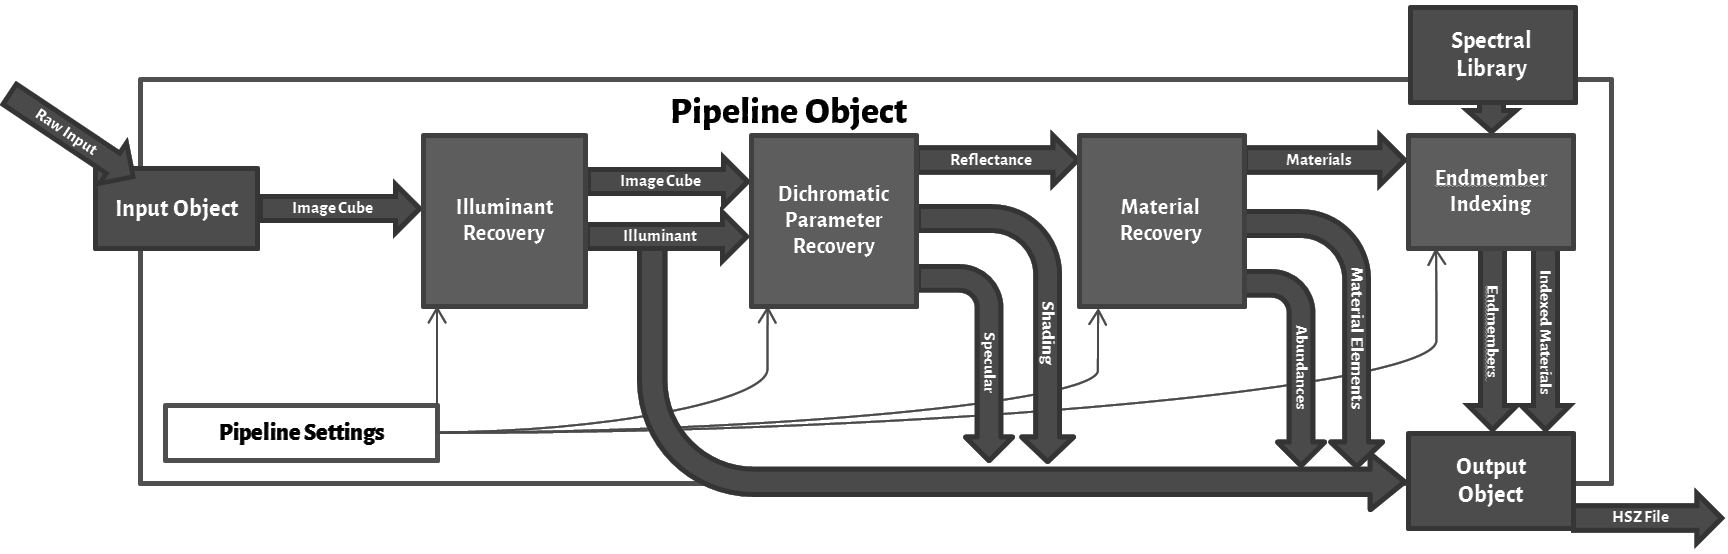 pipeline_object.png